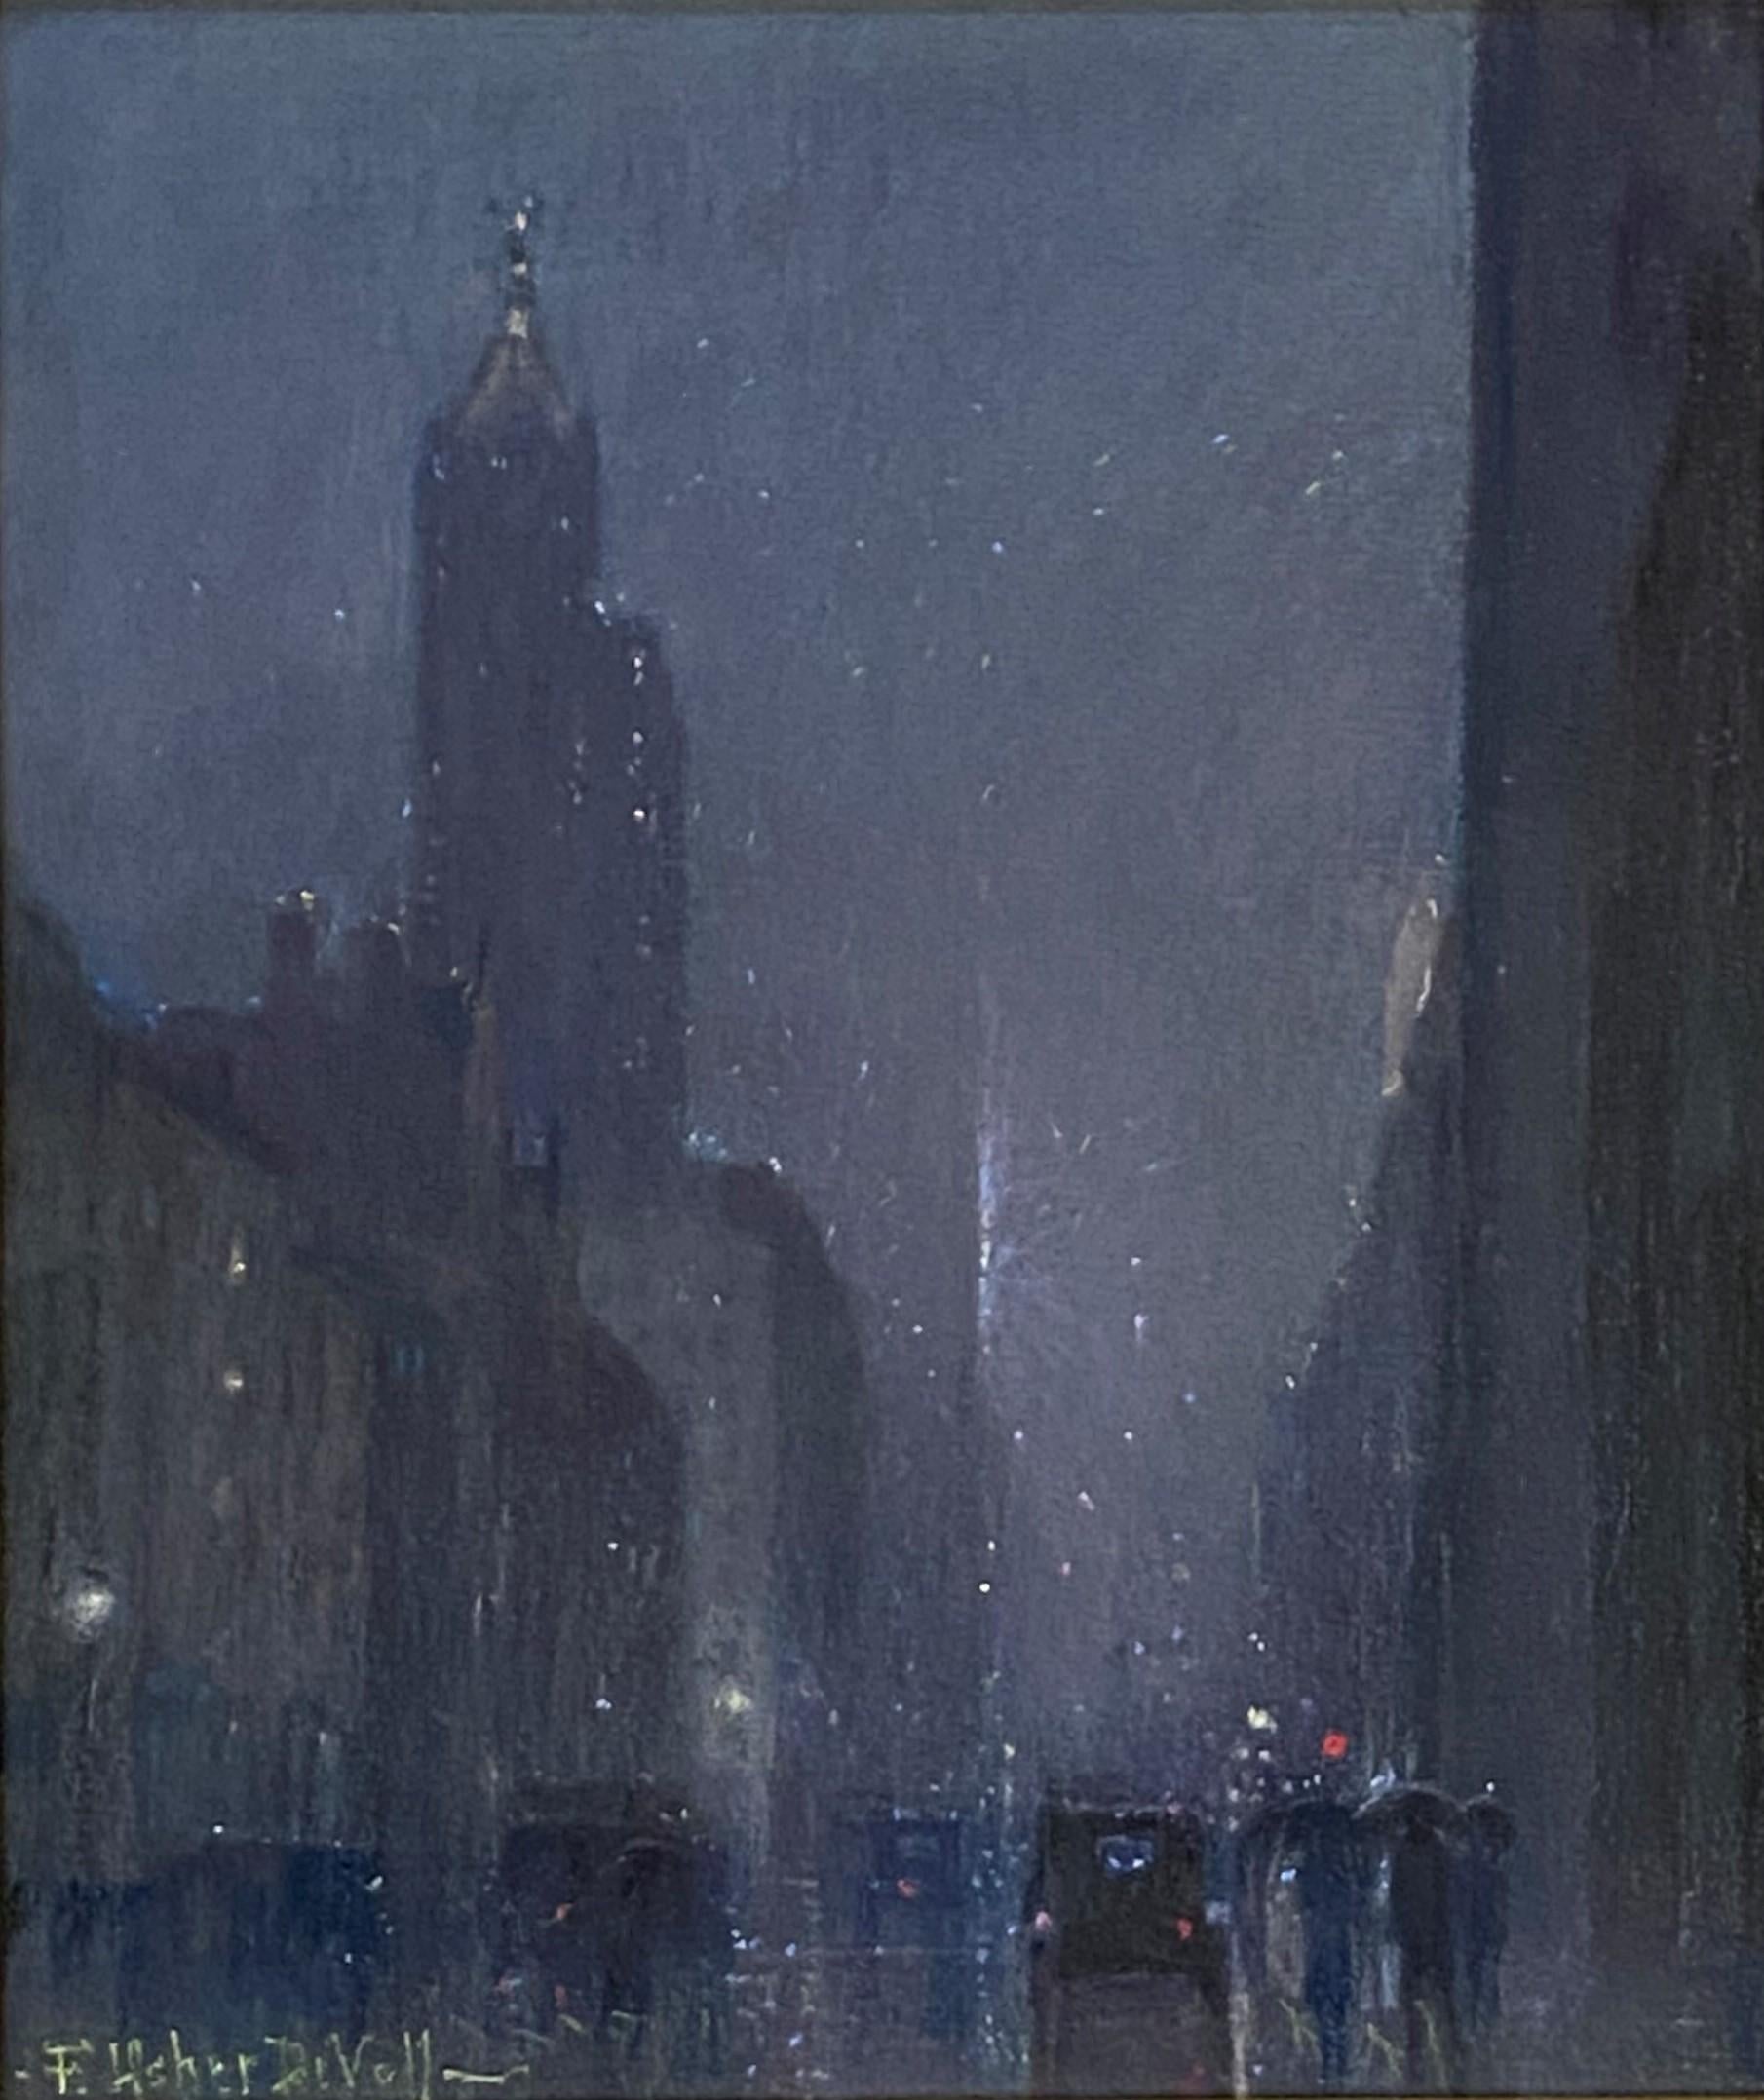 New York City Street Scene at Night - Painting by Frederick (Frank) Usher De Voll